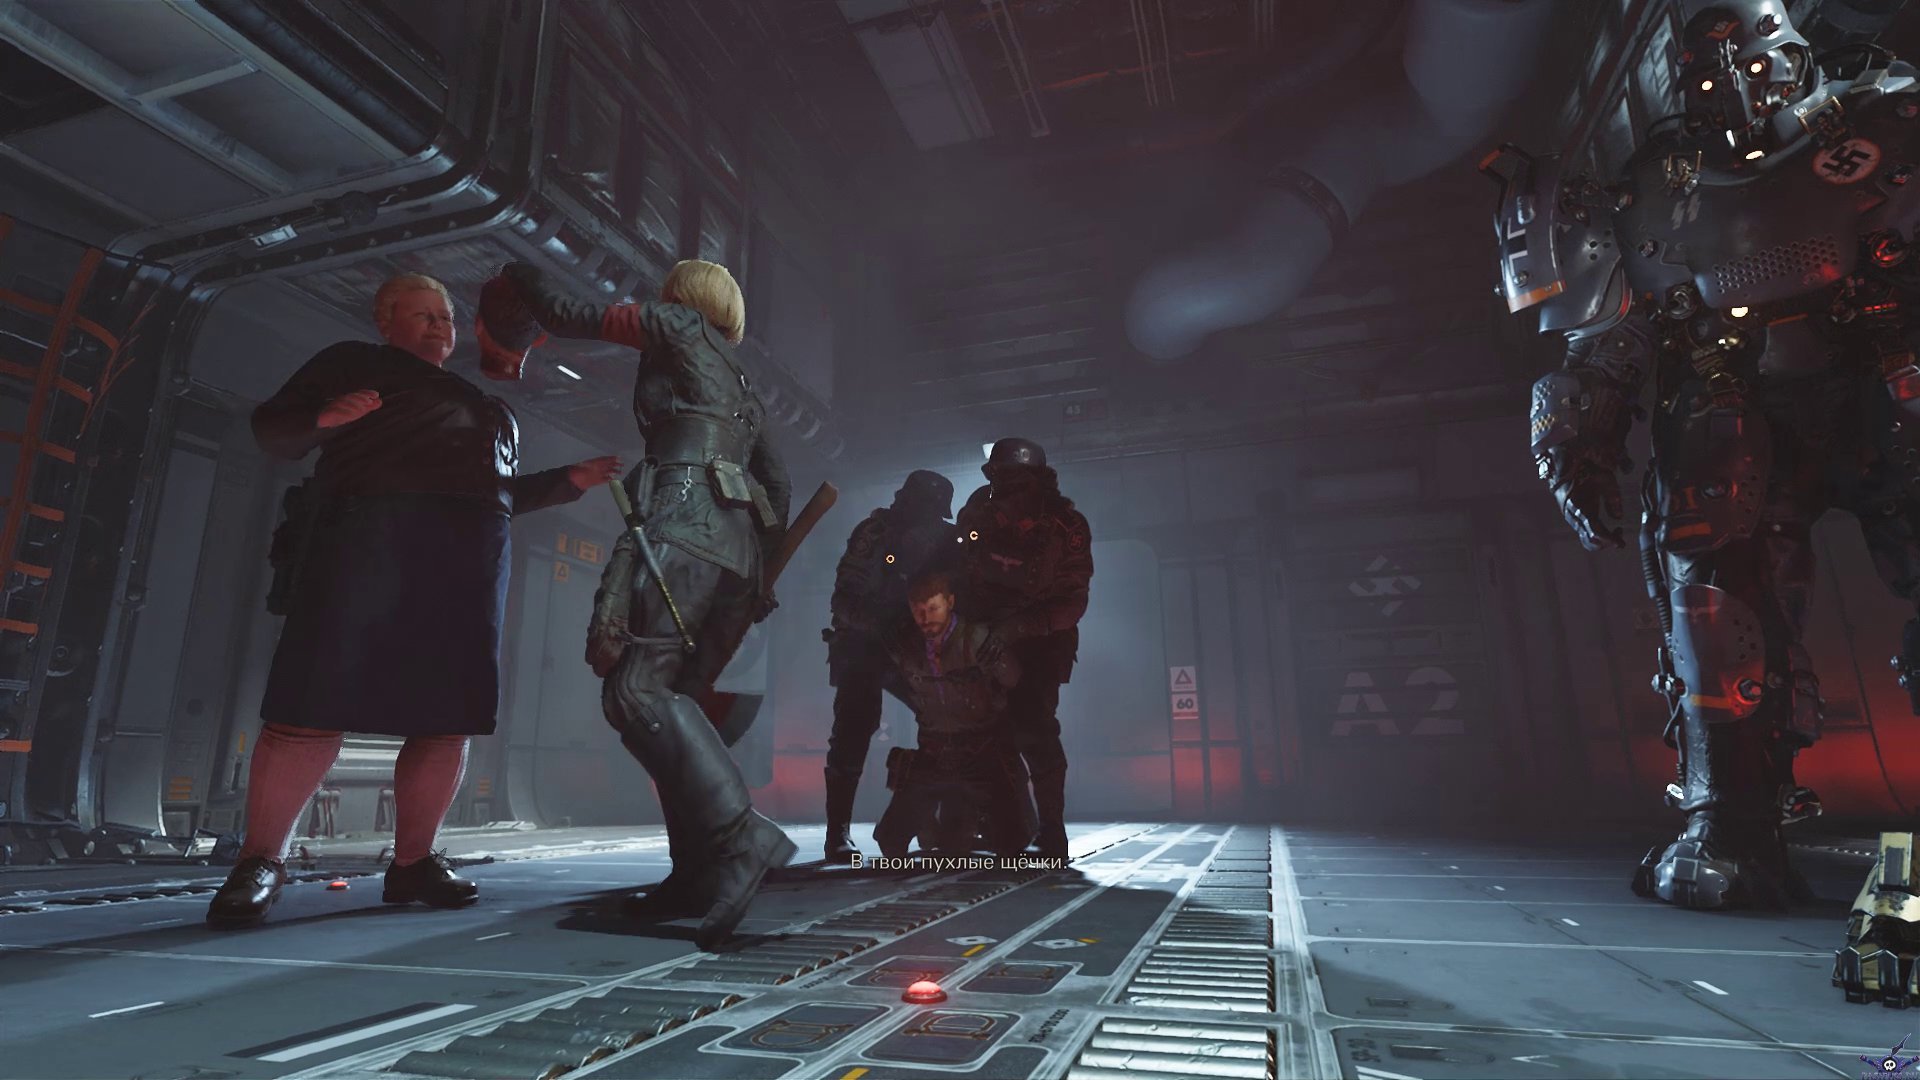 Wolfenstein ii the new colossus could. Вольфенштайн the New Colossus. Игра вольфенштайн 2. Wolfenstein II the New Colossus 1. Вольфенштайн новый колосс.